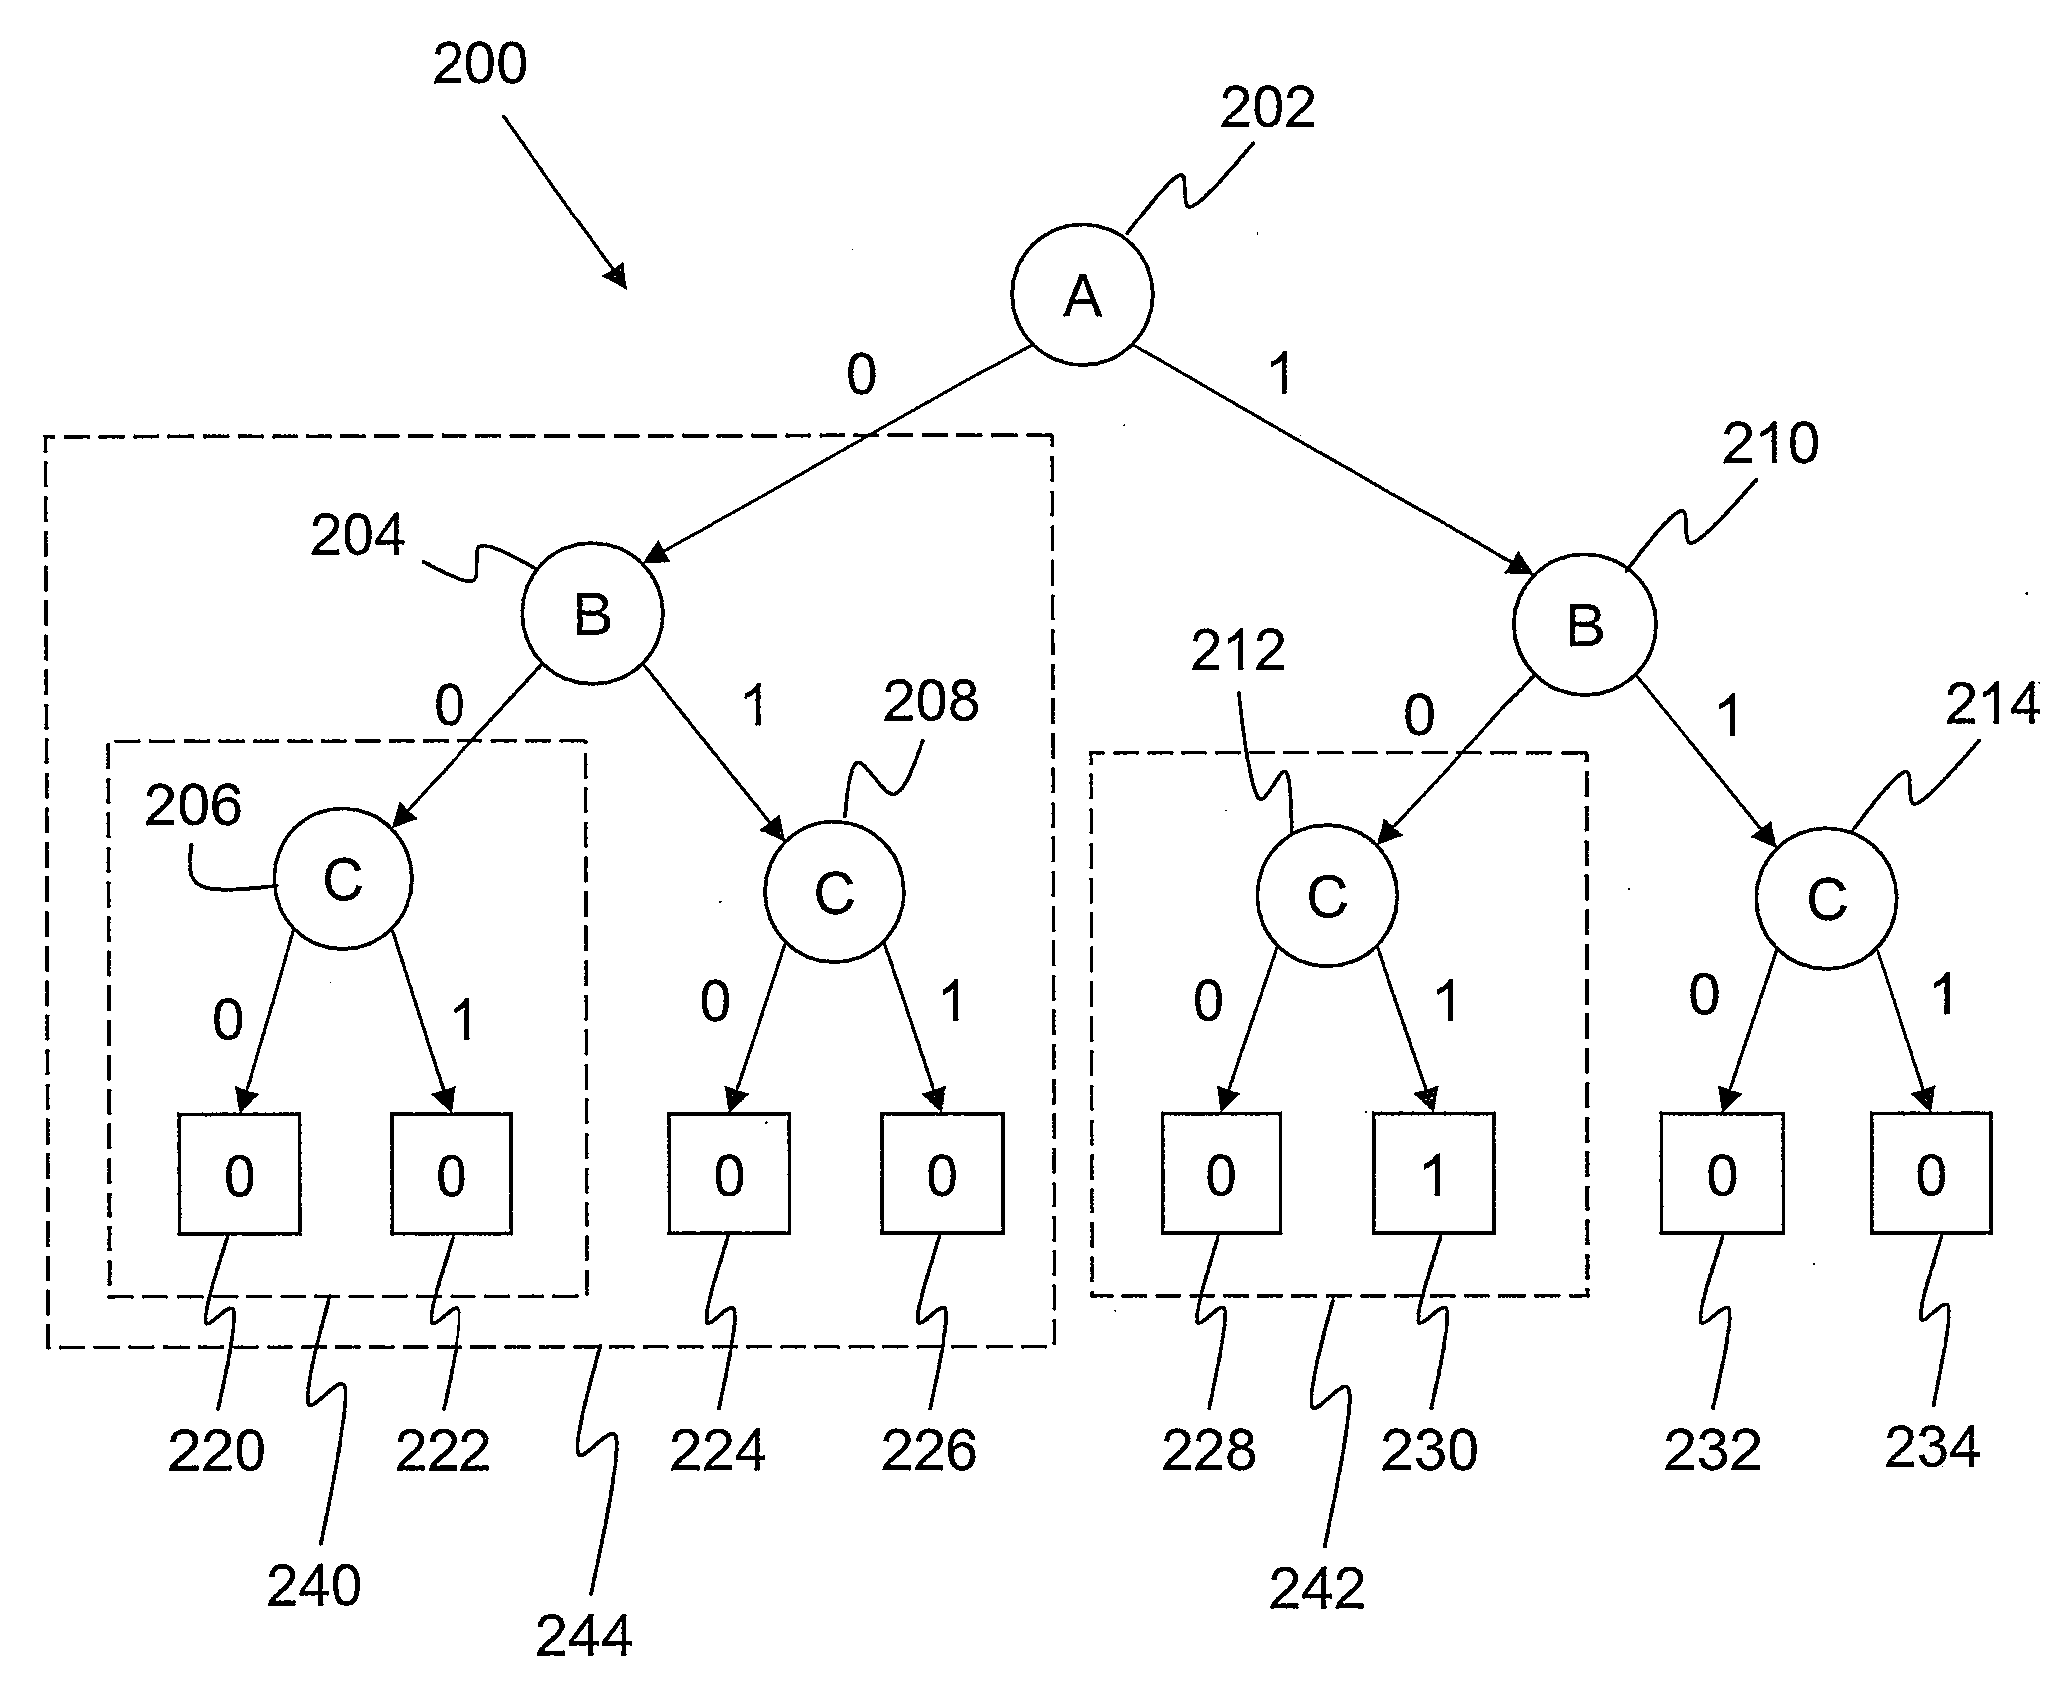 Method and System for Conjunctive BDD Building and Variable Quantification Using Case-Splitting